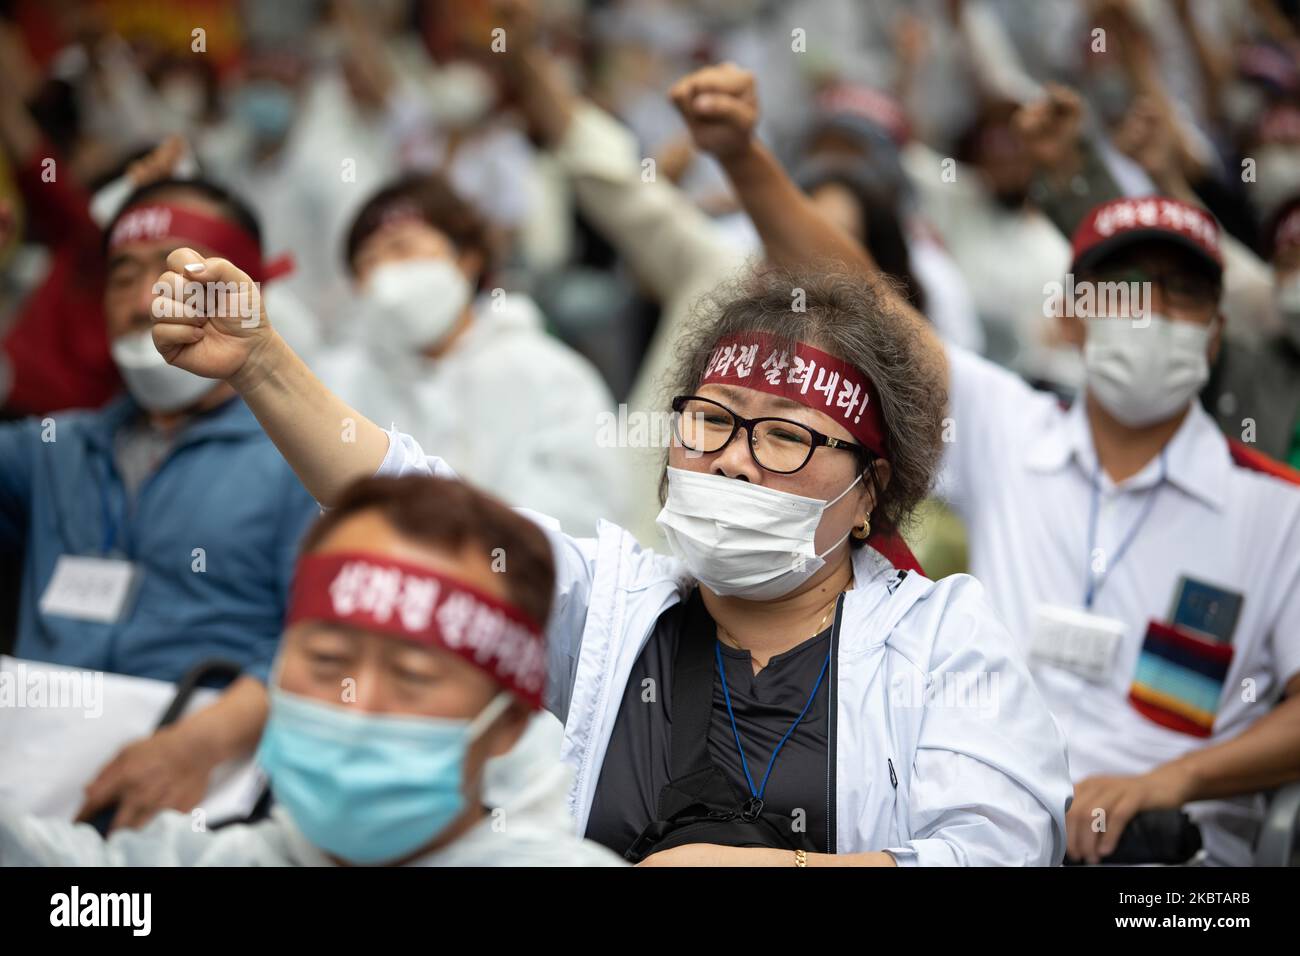 Members of the SillaJen Action Group gather for a rally in front of the Korea Exchange in Yeouido, Yeongdeungpo-gu, Seoul in South Korea on July 10, 2020 to urge the recovery of SillaJen sovereignty and resumption of transactions. (Photo by Chris Jung/NurPhoto) Stock Photo